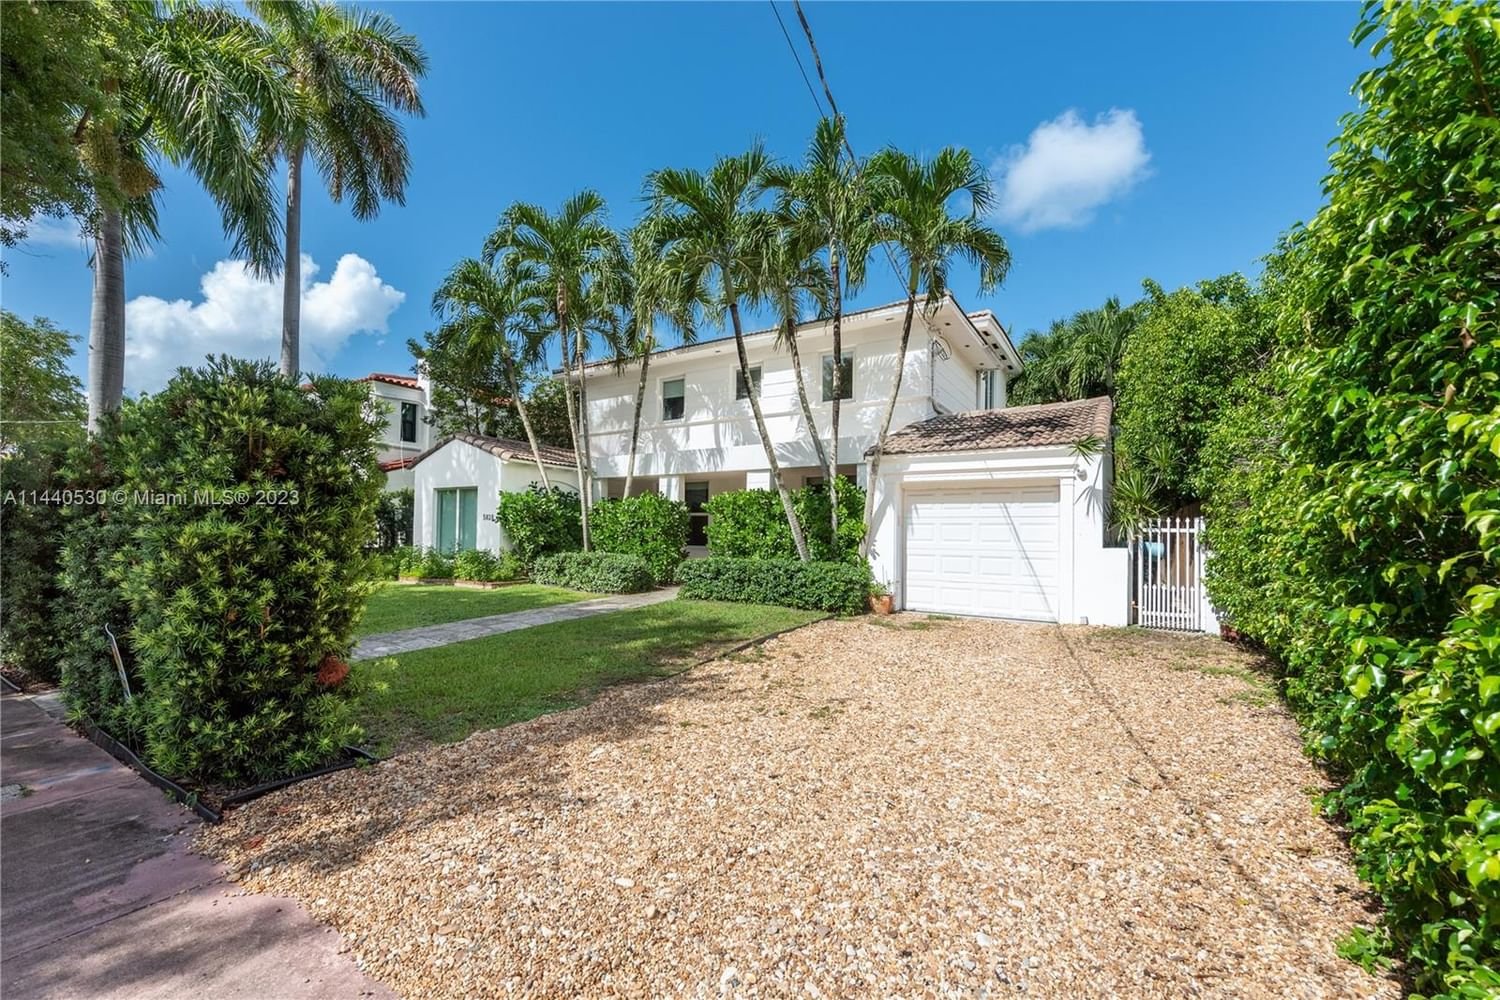 Real estate property located at 5828 Pine Tree Dr, Miami-Dade County, Miami Beach, FL